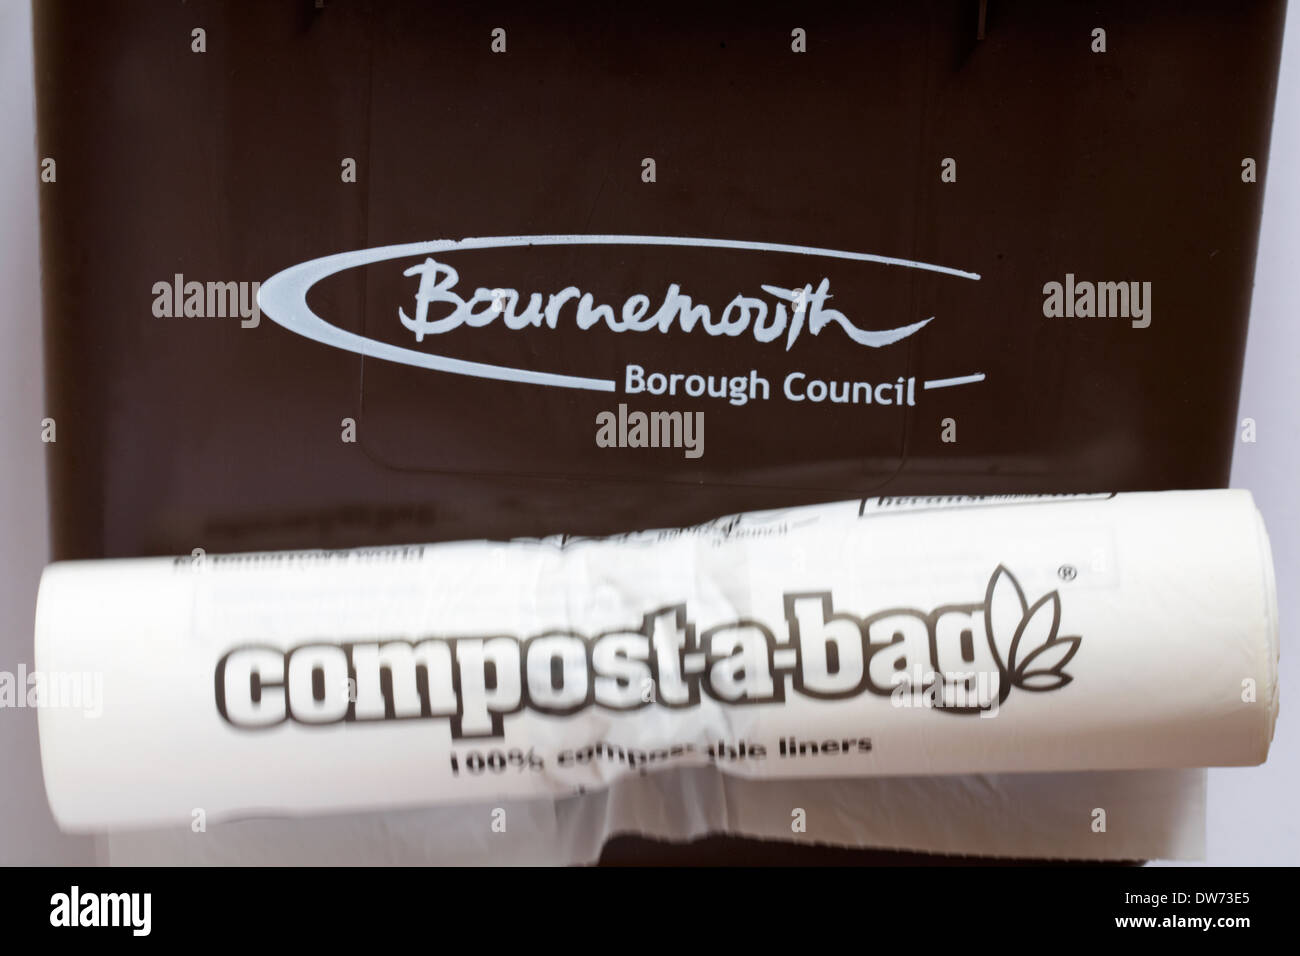 Bournemouth Borough Council food waste bin with compost-a-bag 100% compostable liners bags Stock Photo